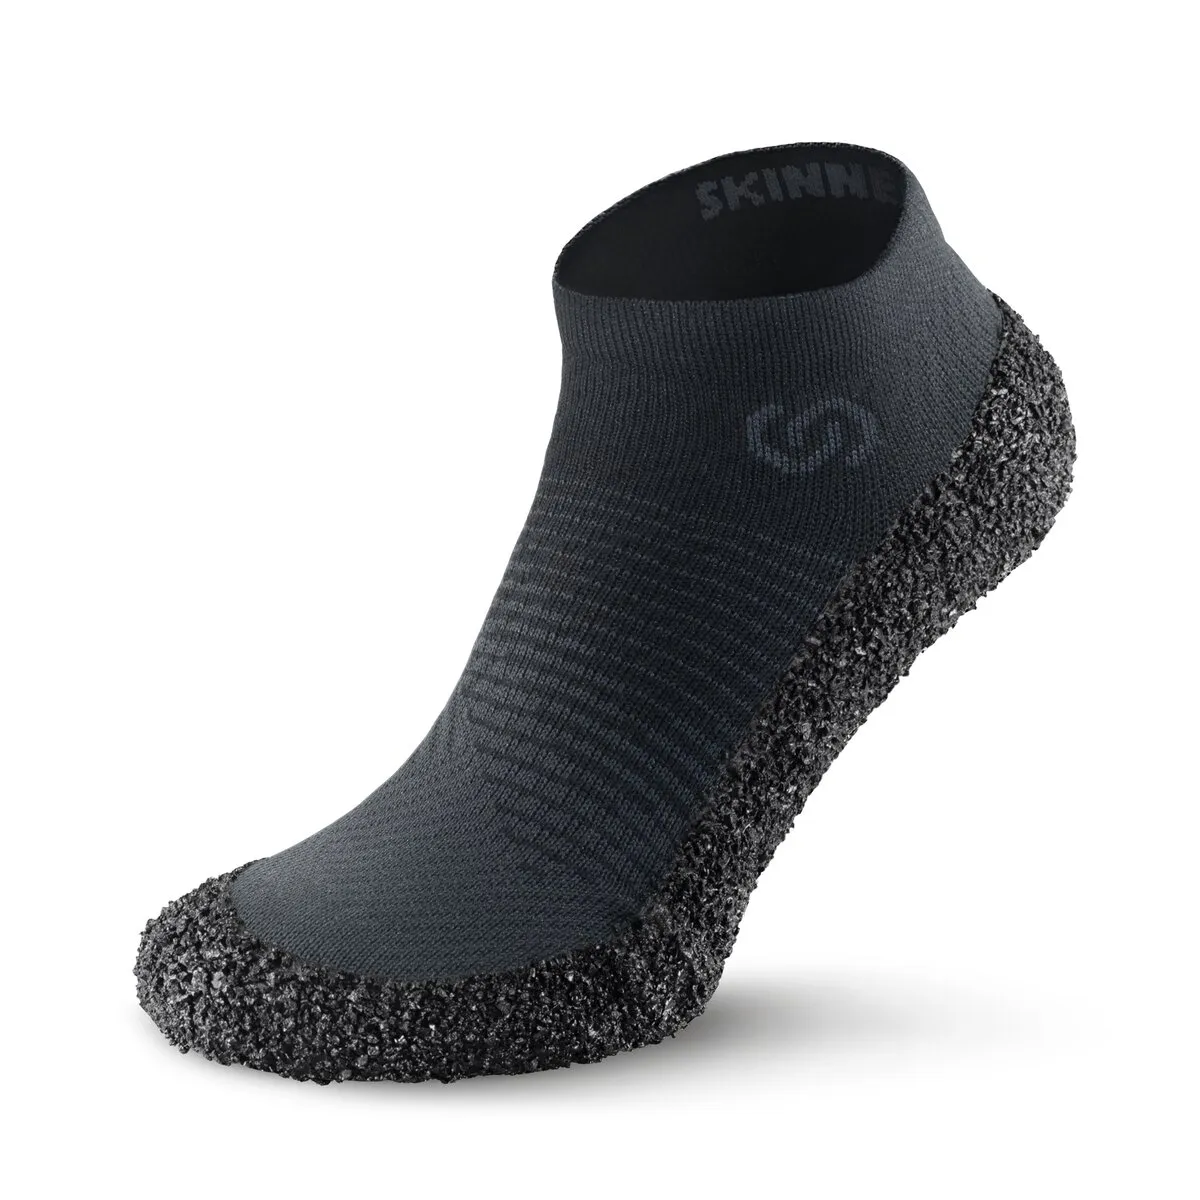 SKINNERS 2.0 adults Anthracite